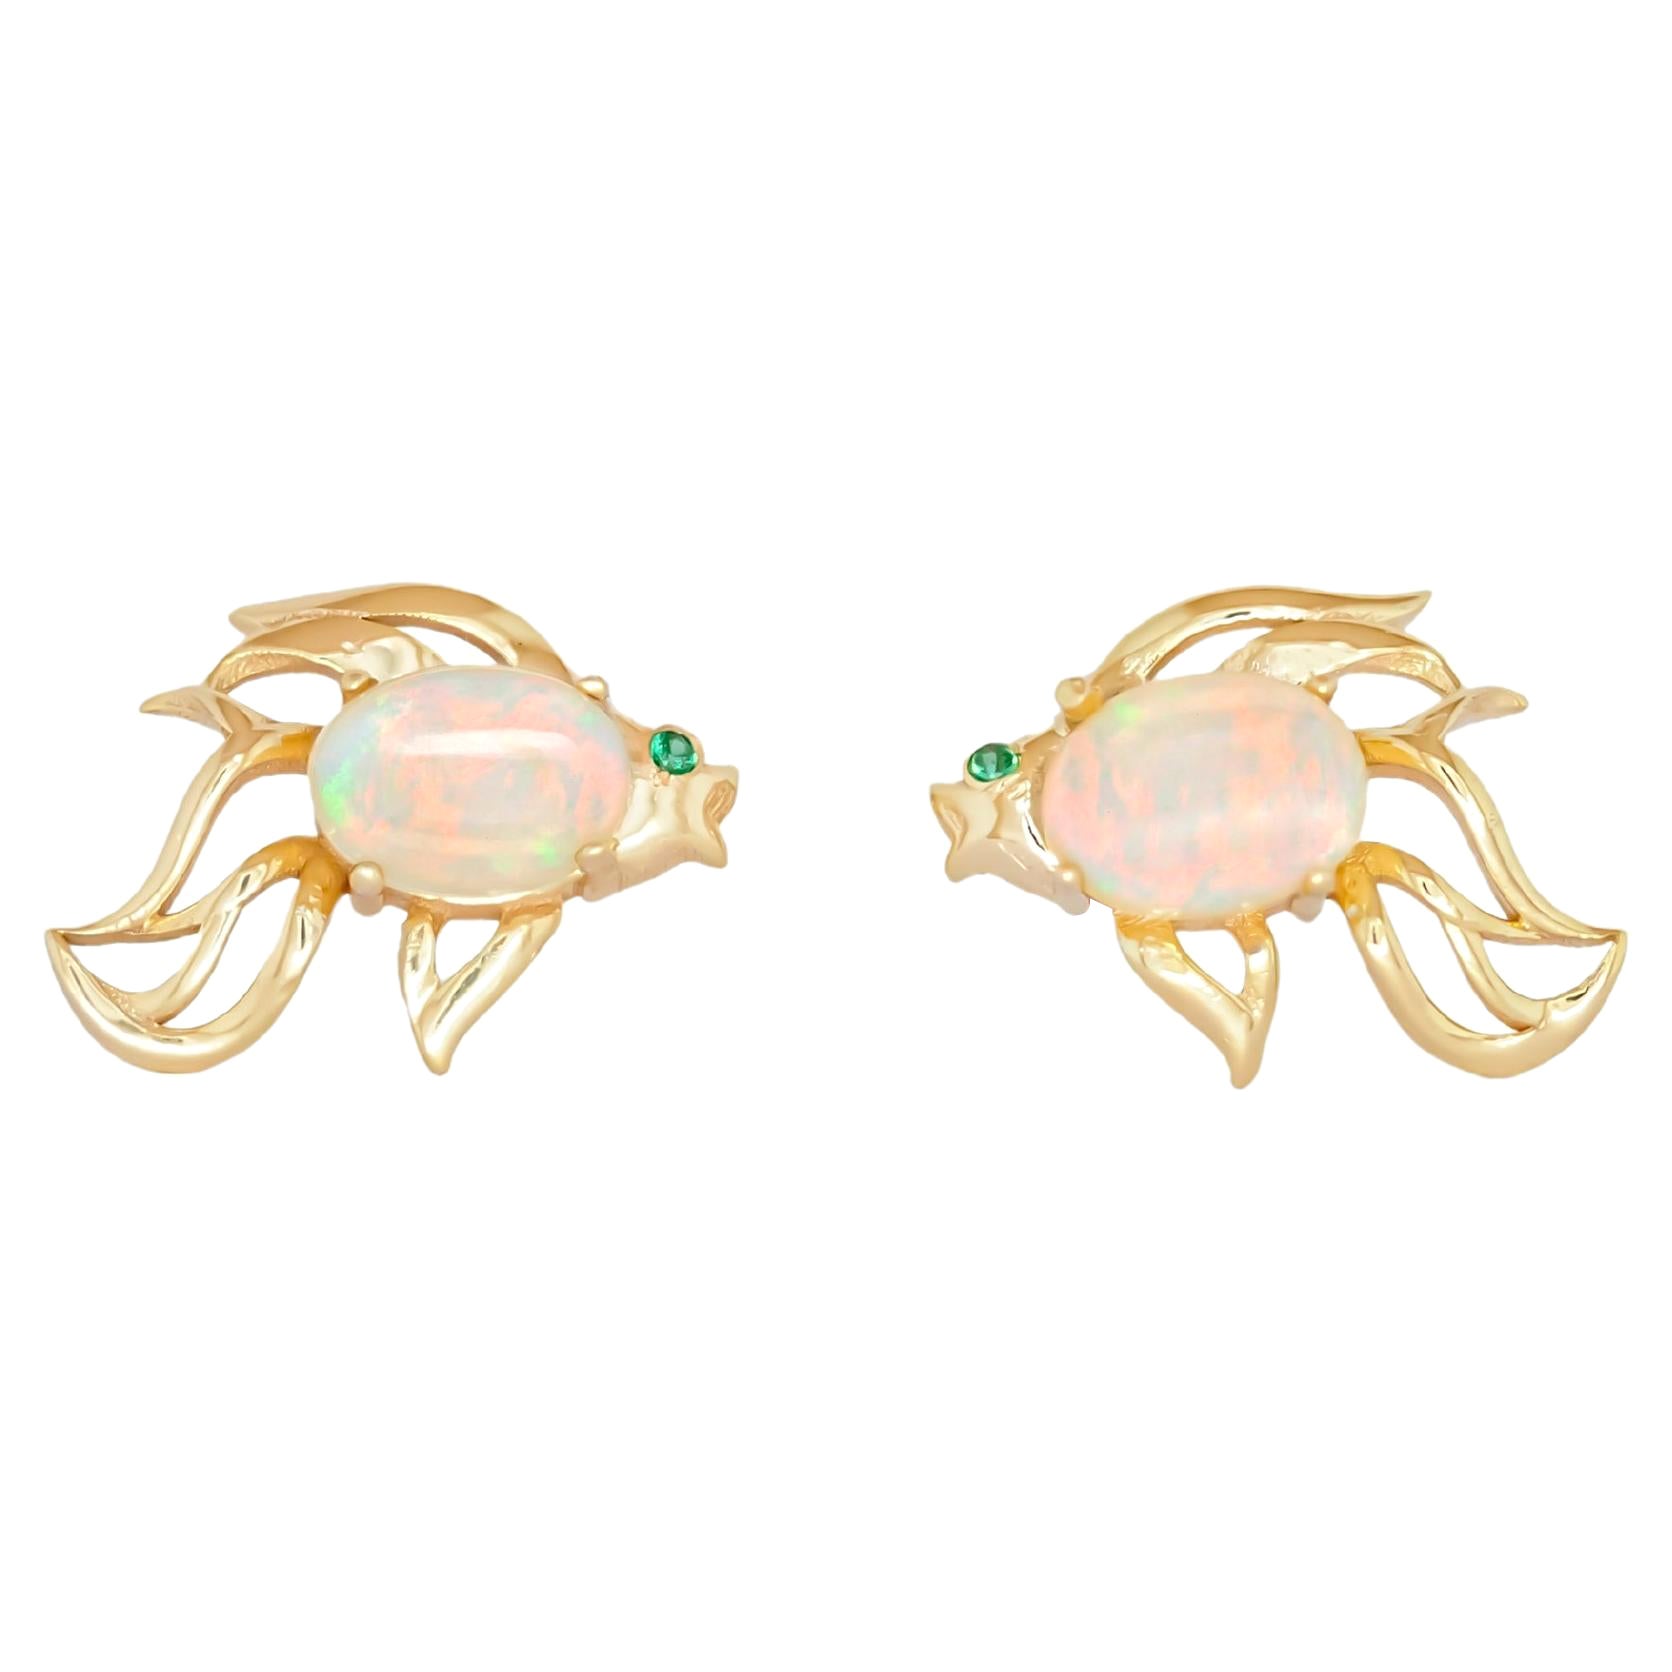 14k gold Fish earrings studs set in 14k gold. For Sale